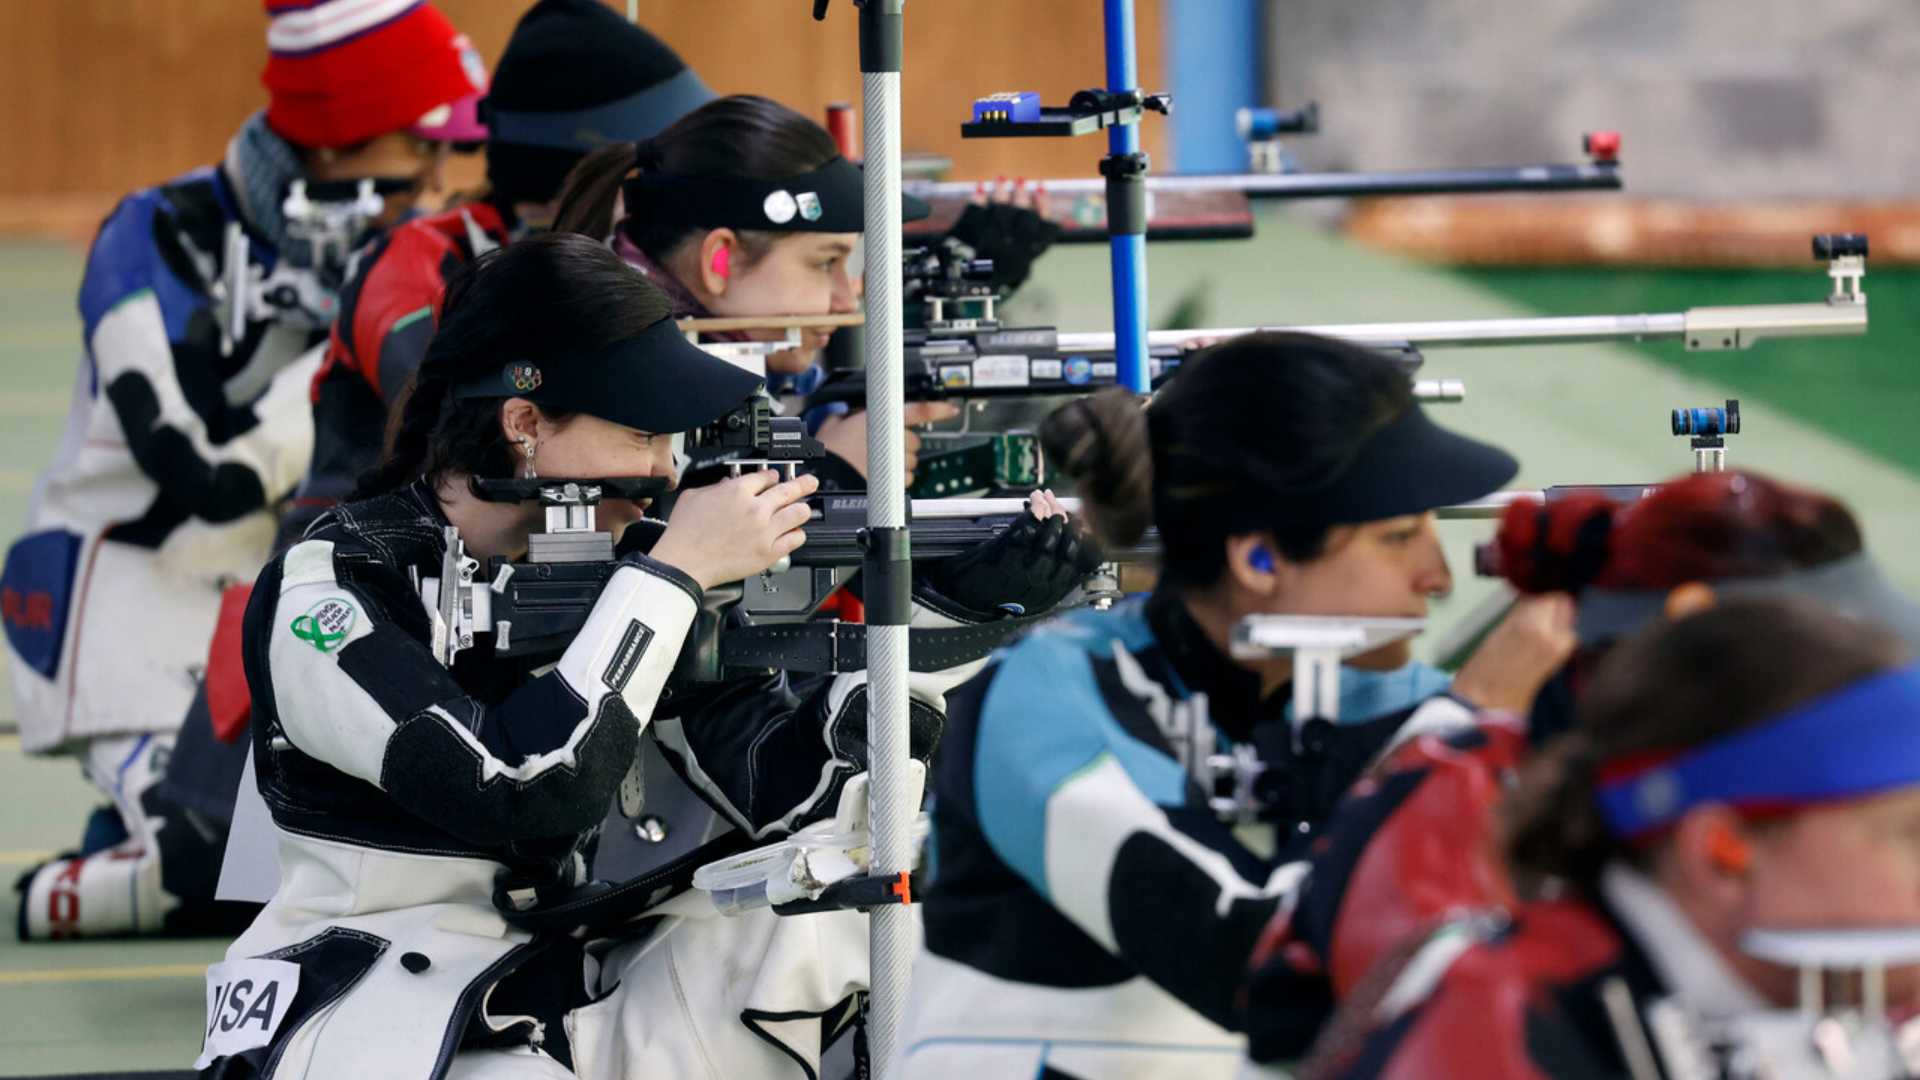 The United States takes gold and silver in female’s 3 x 20 rifle shooting